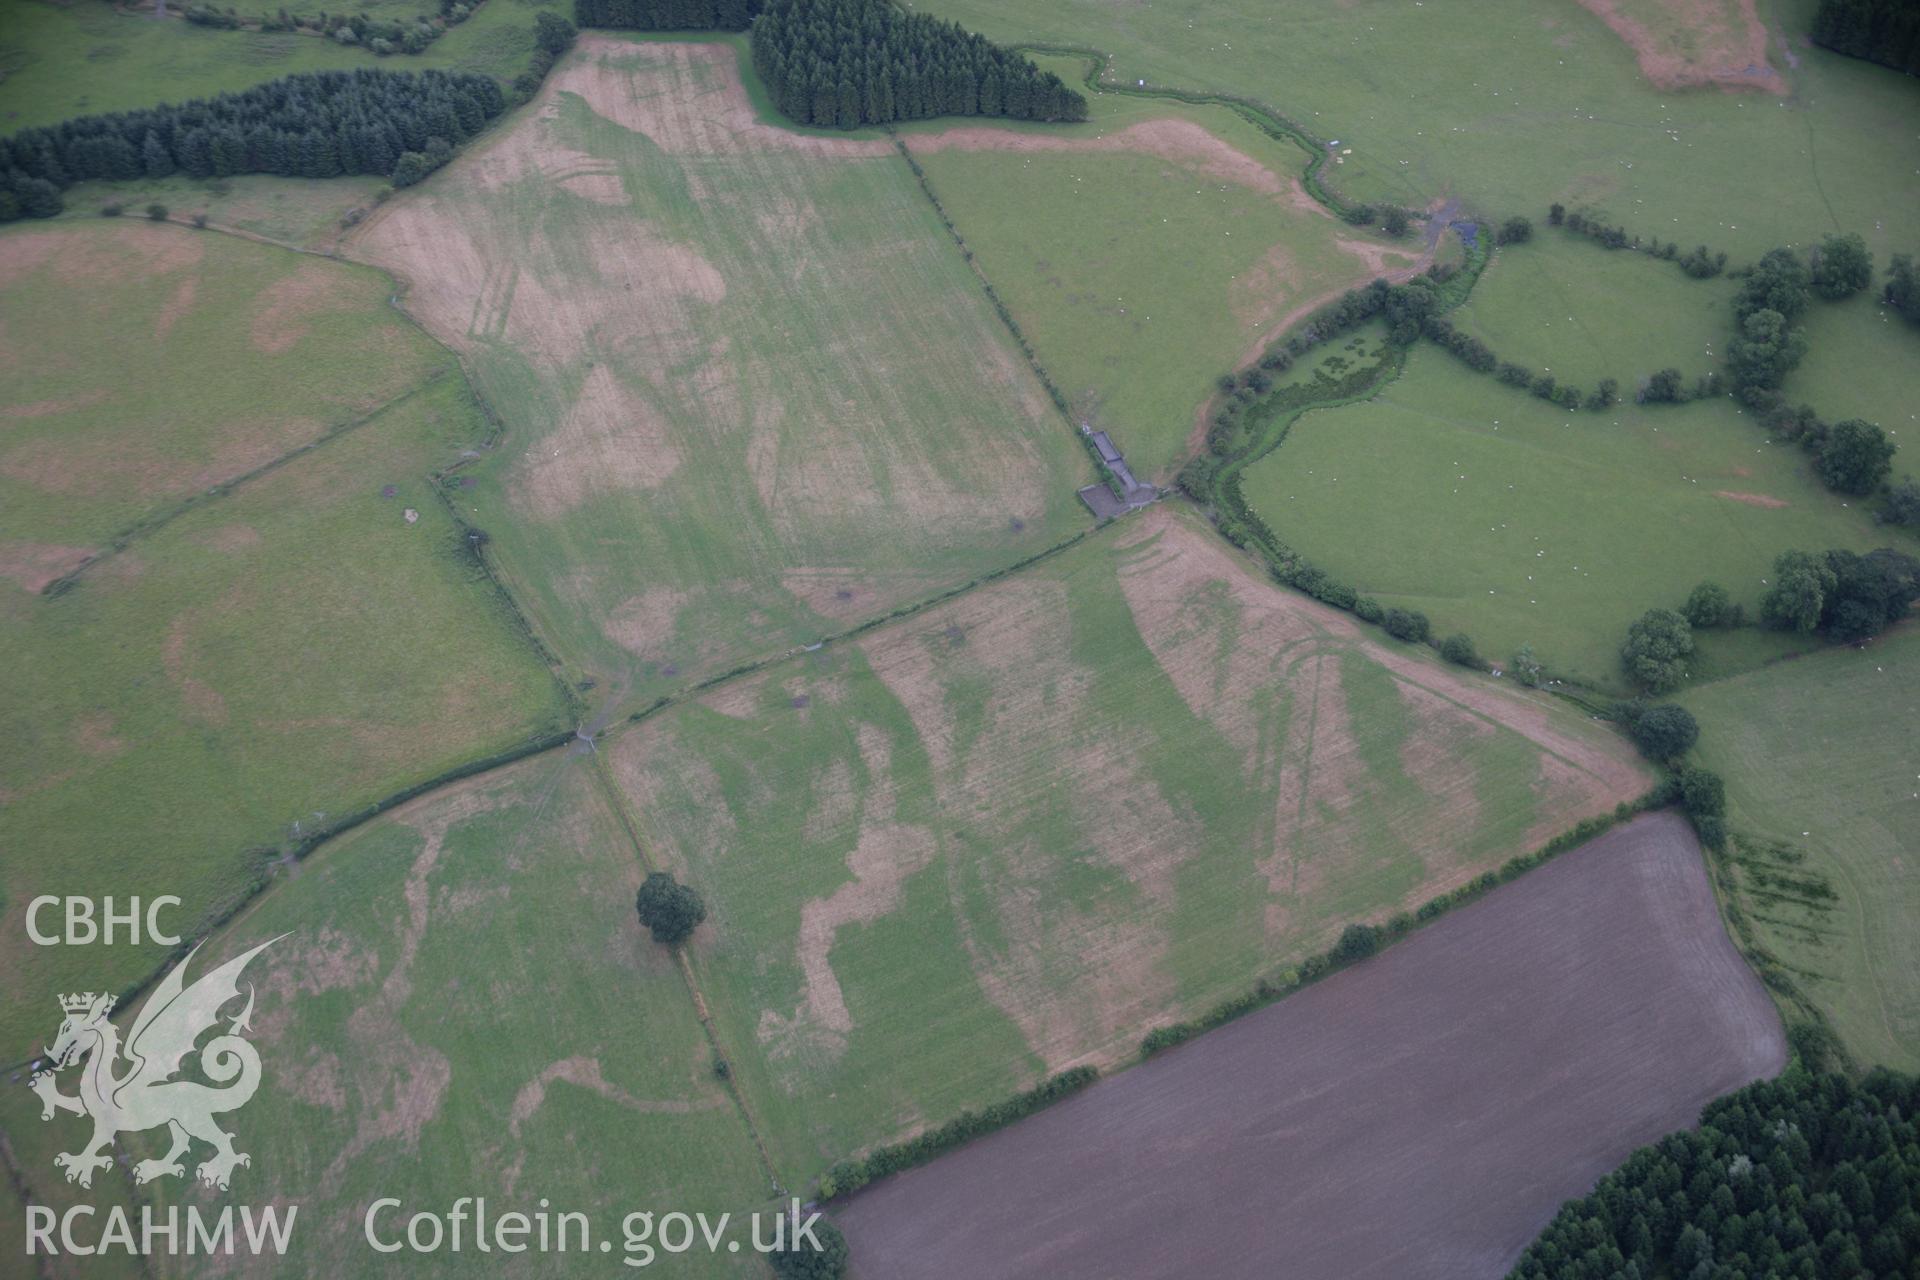 RCAHMW colour oblique aerial photograph of Llanfor Roman Military Complex visible in cropmarks, in general view from the north-west. Taken on 31 July 2006 by Toby Driver.